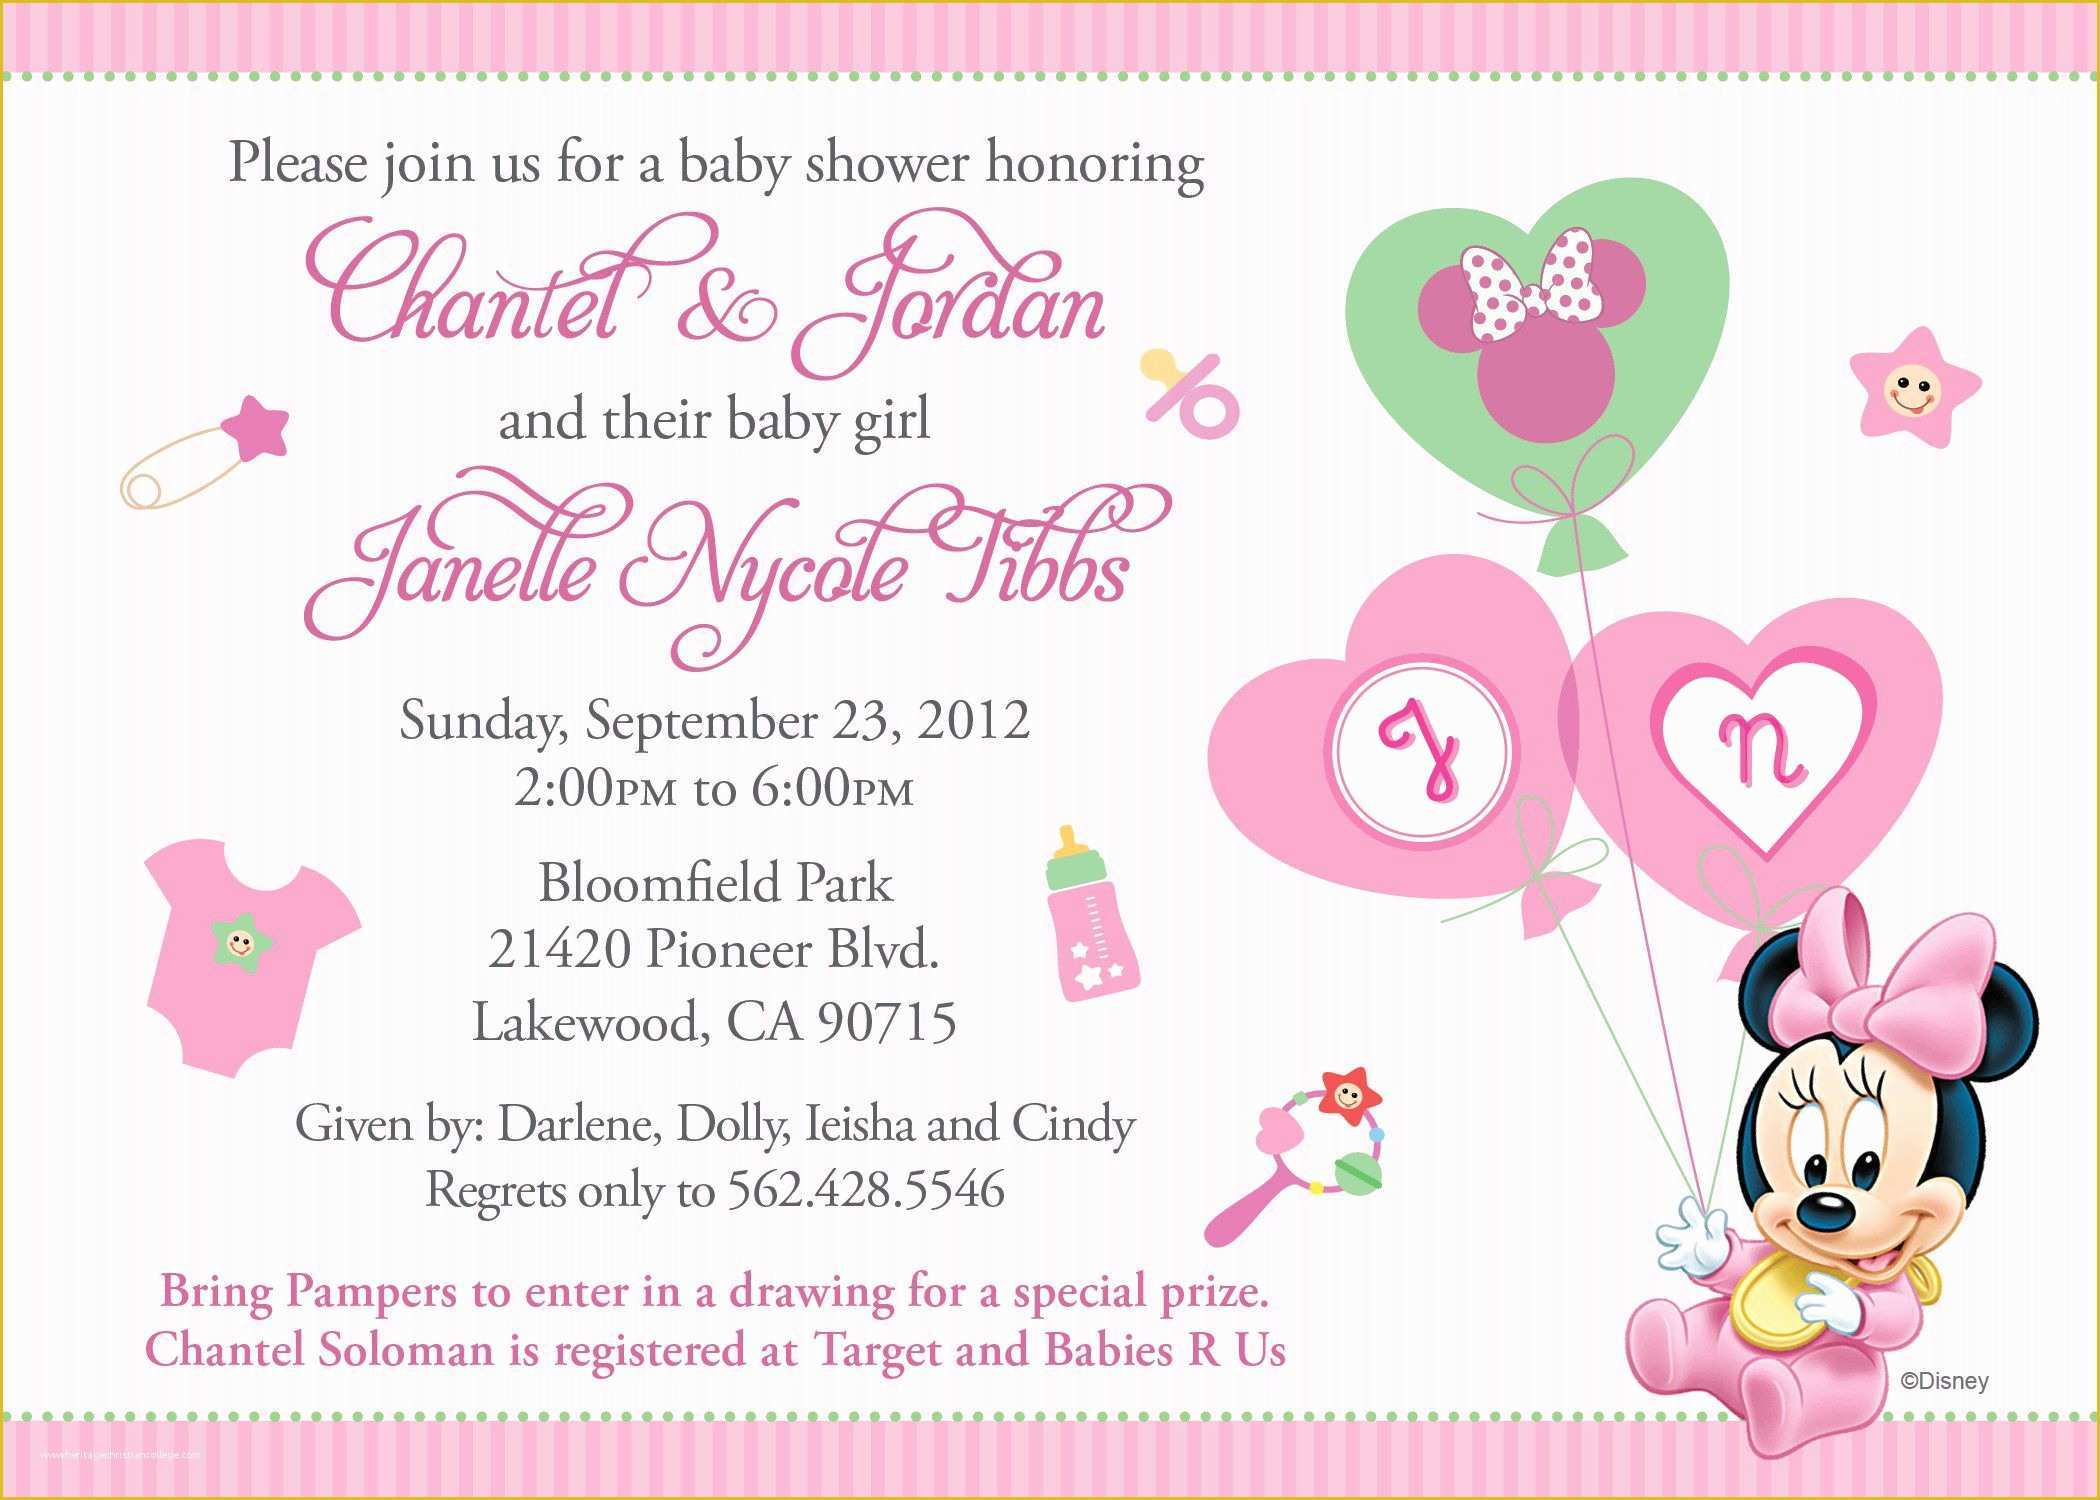 Free Online Baby Shower Invitations Templates Of Baby Shower Invitation Free Baby Shower Invitation